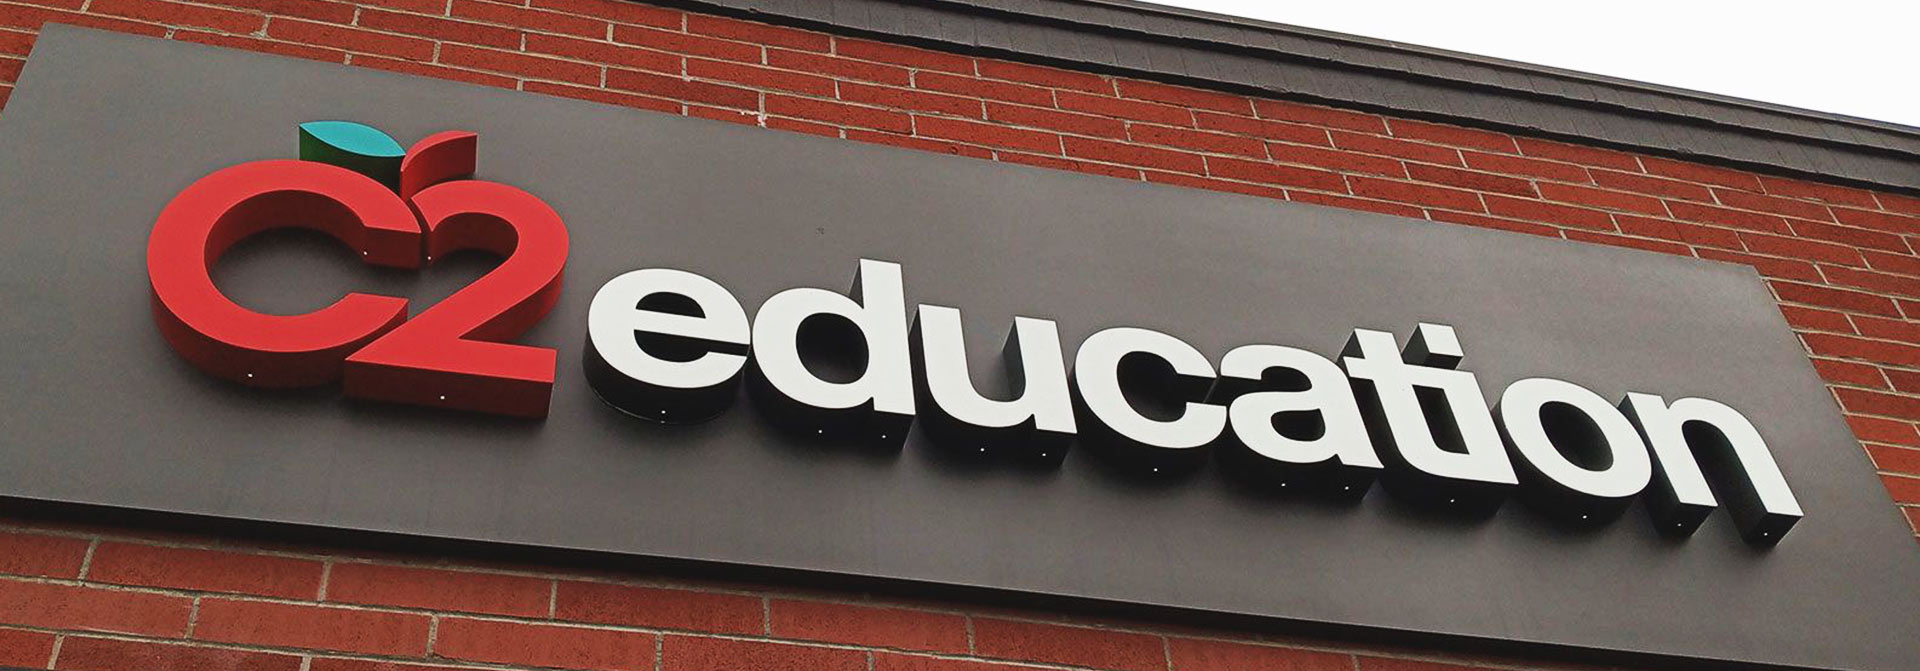 Storefront campus signage design featuring logo in red and a text 'education' in white